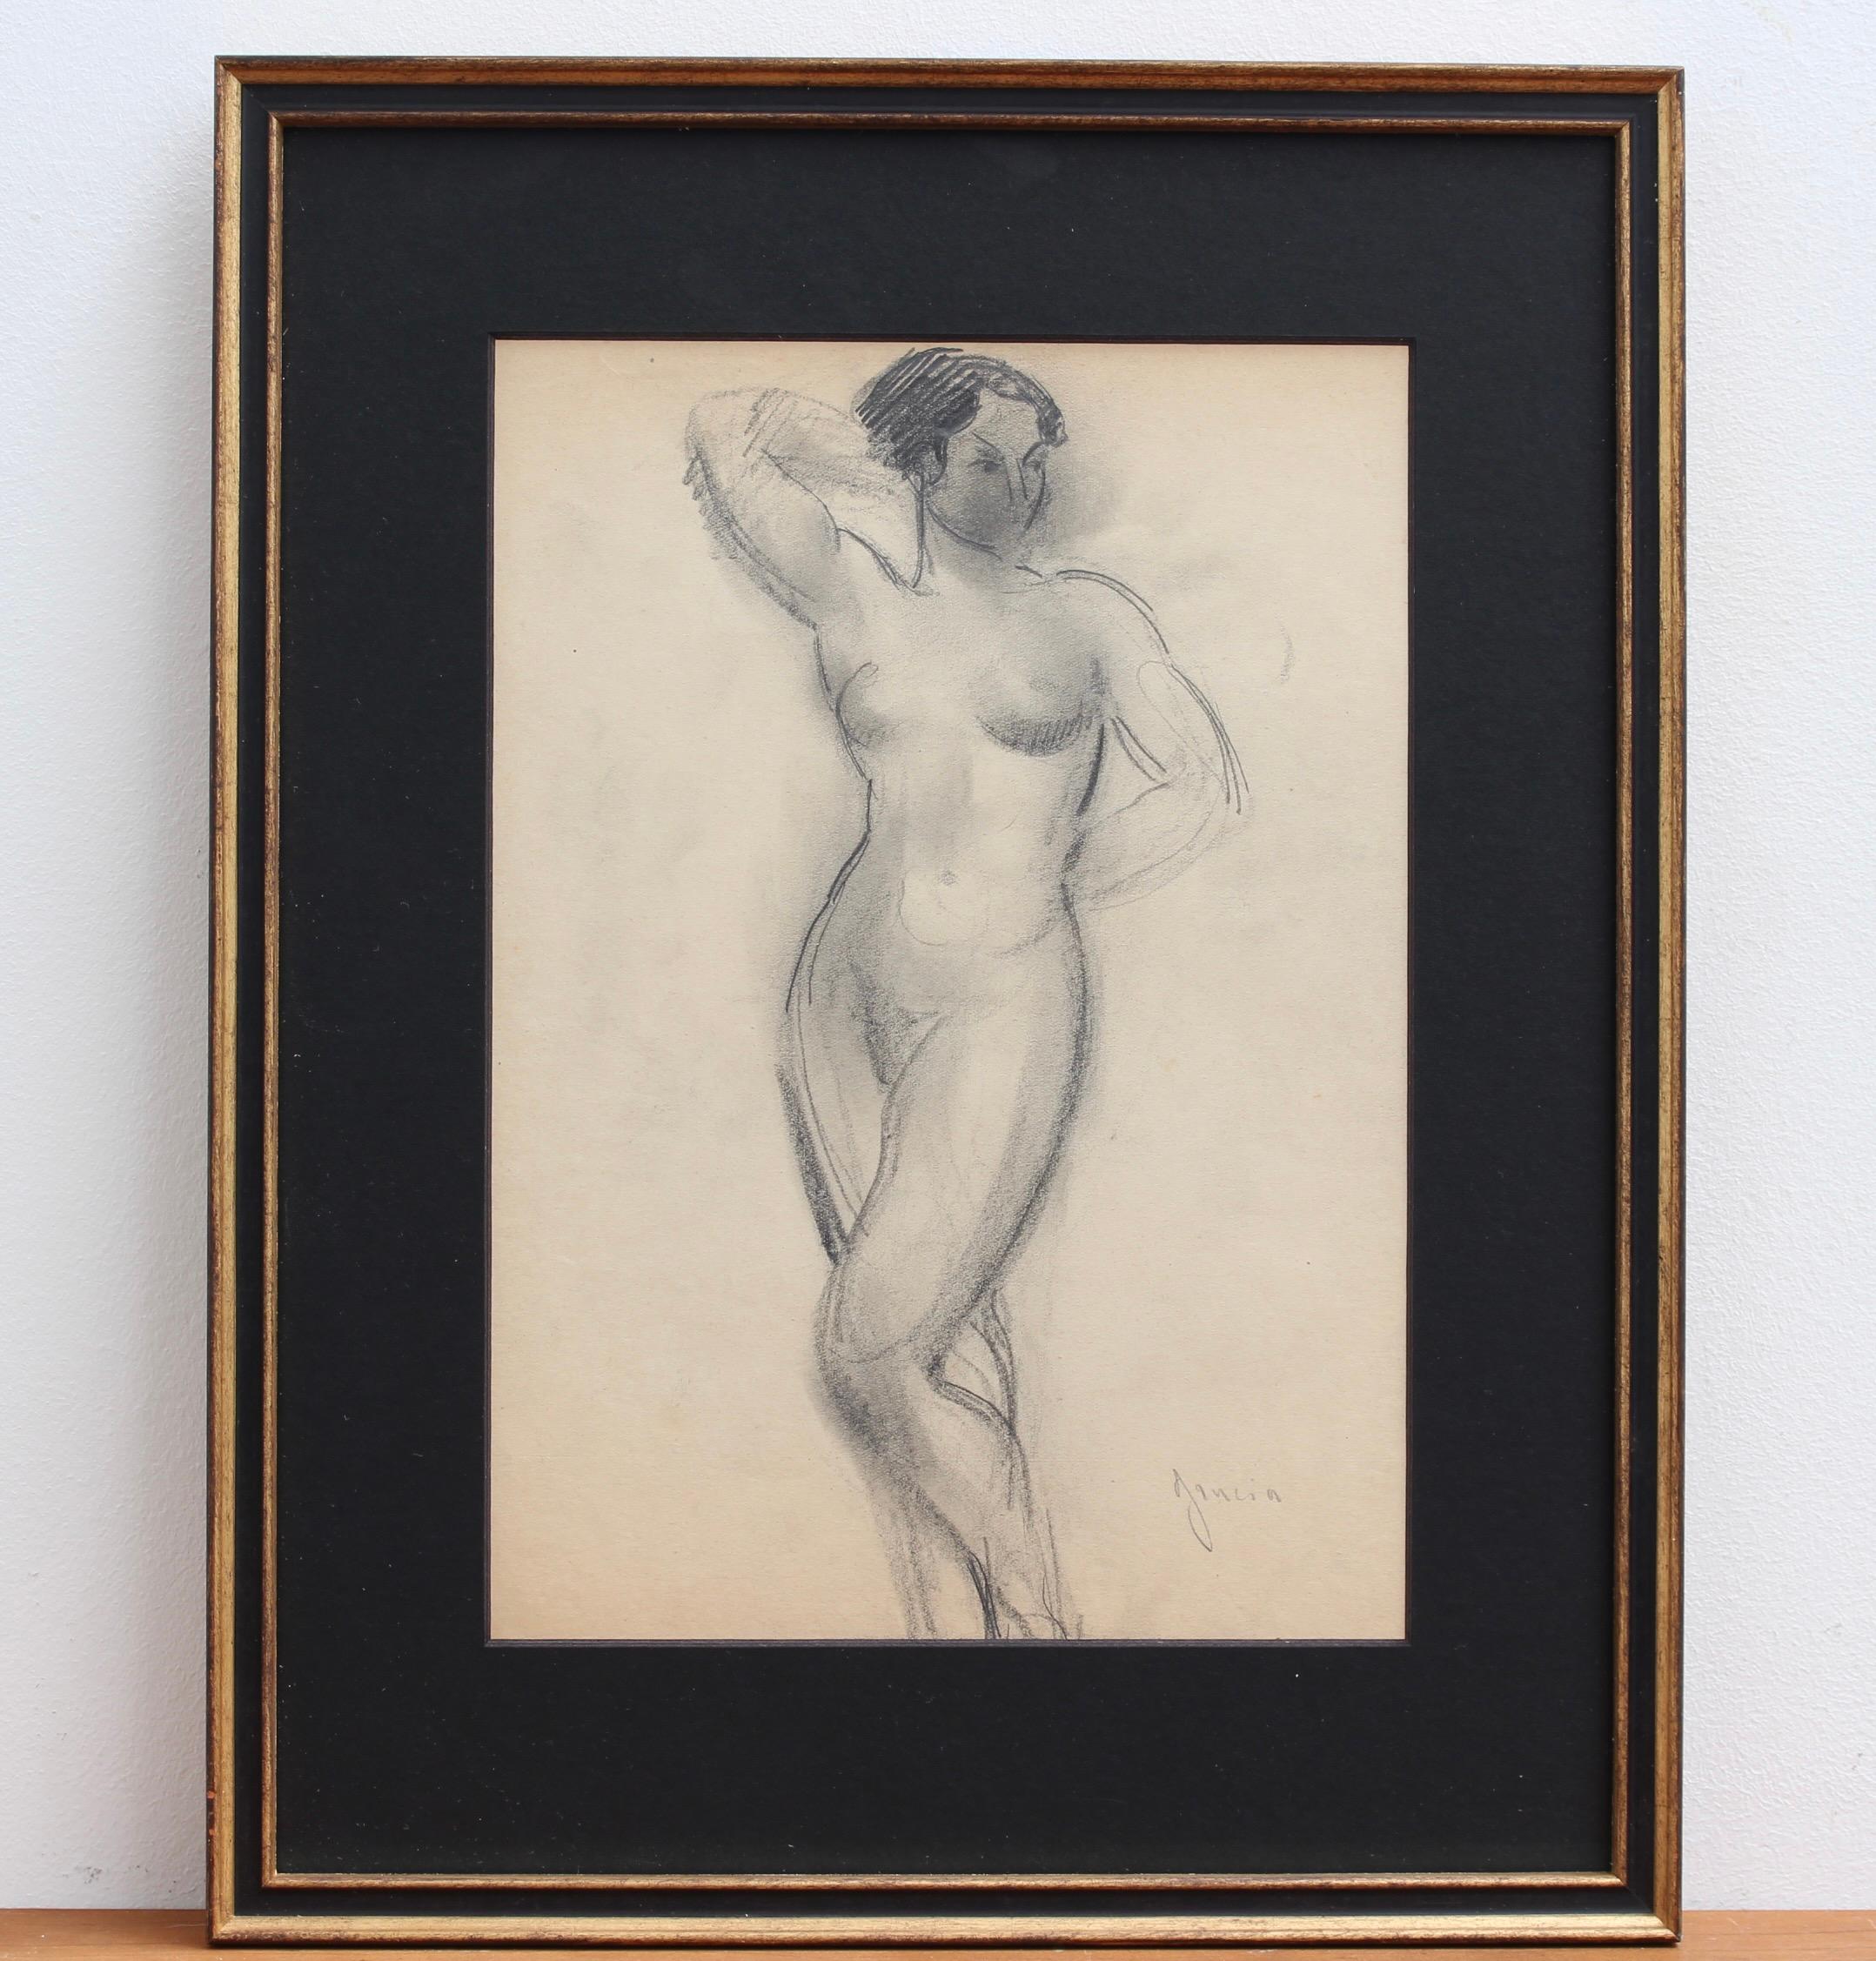 'Portrait of Posing Nude', pencil on art paper, by French artist, Guillaume Dulac (circa 1920s). An artist known for his exquisite drawings - many are sketches for his larger oil paintings or other works - this piece is compelling because its image